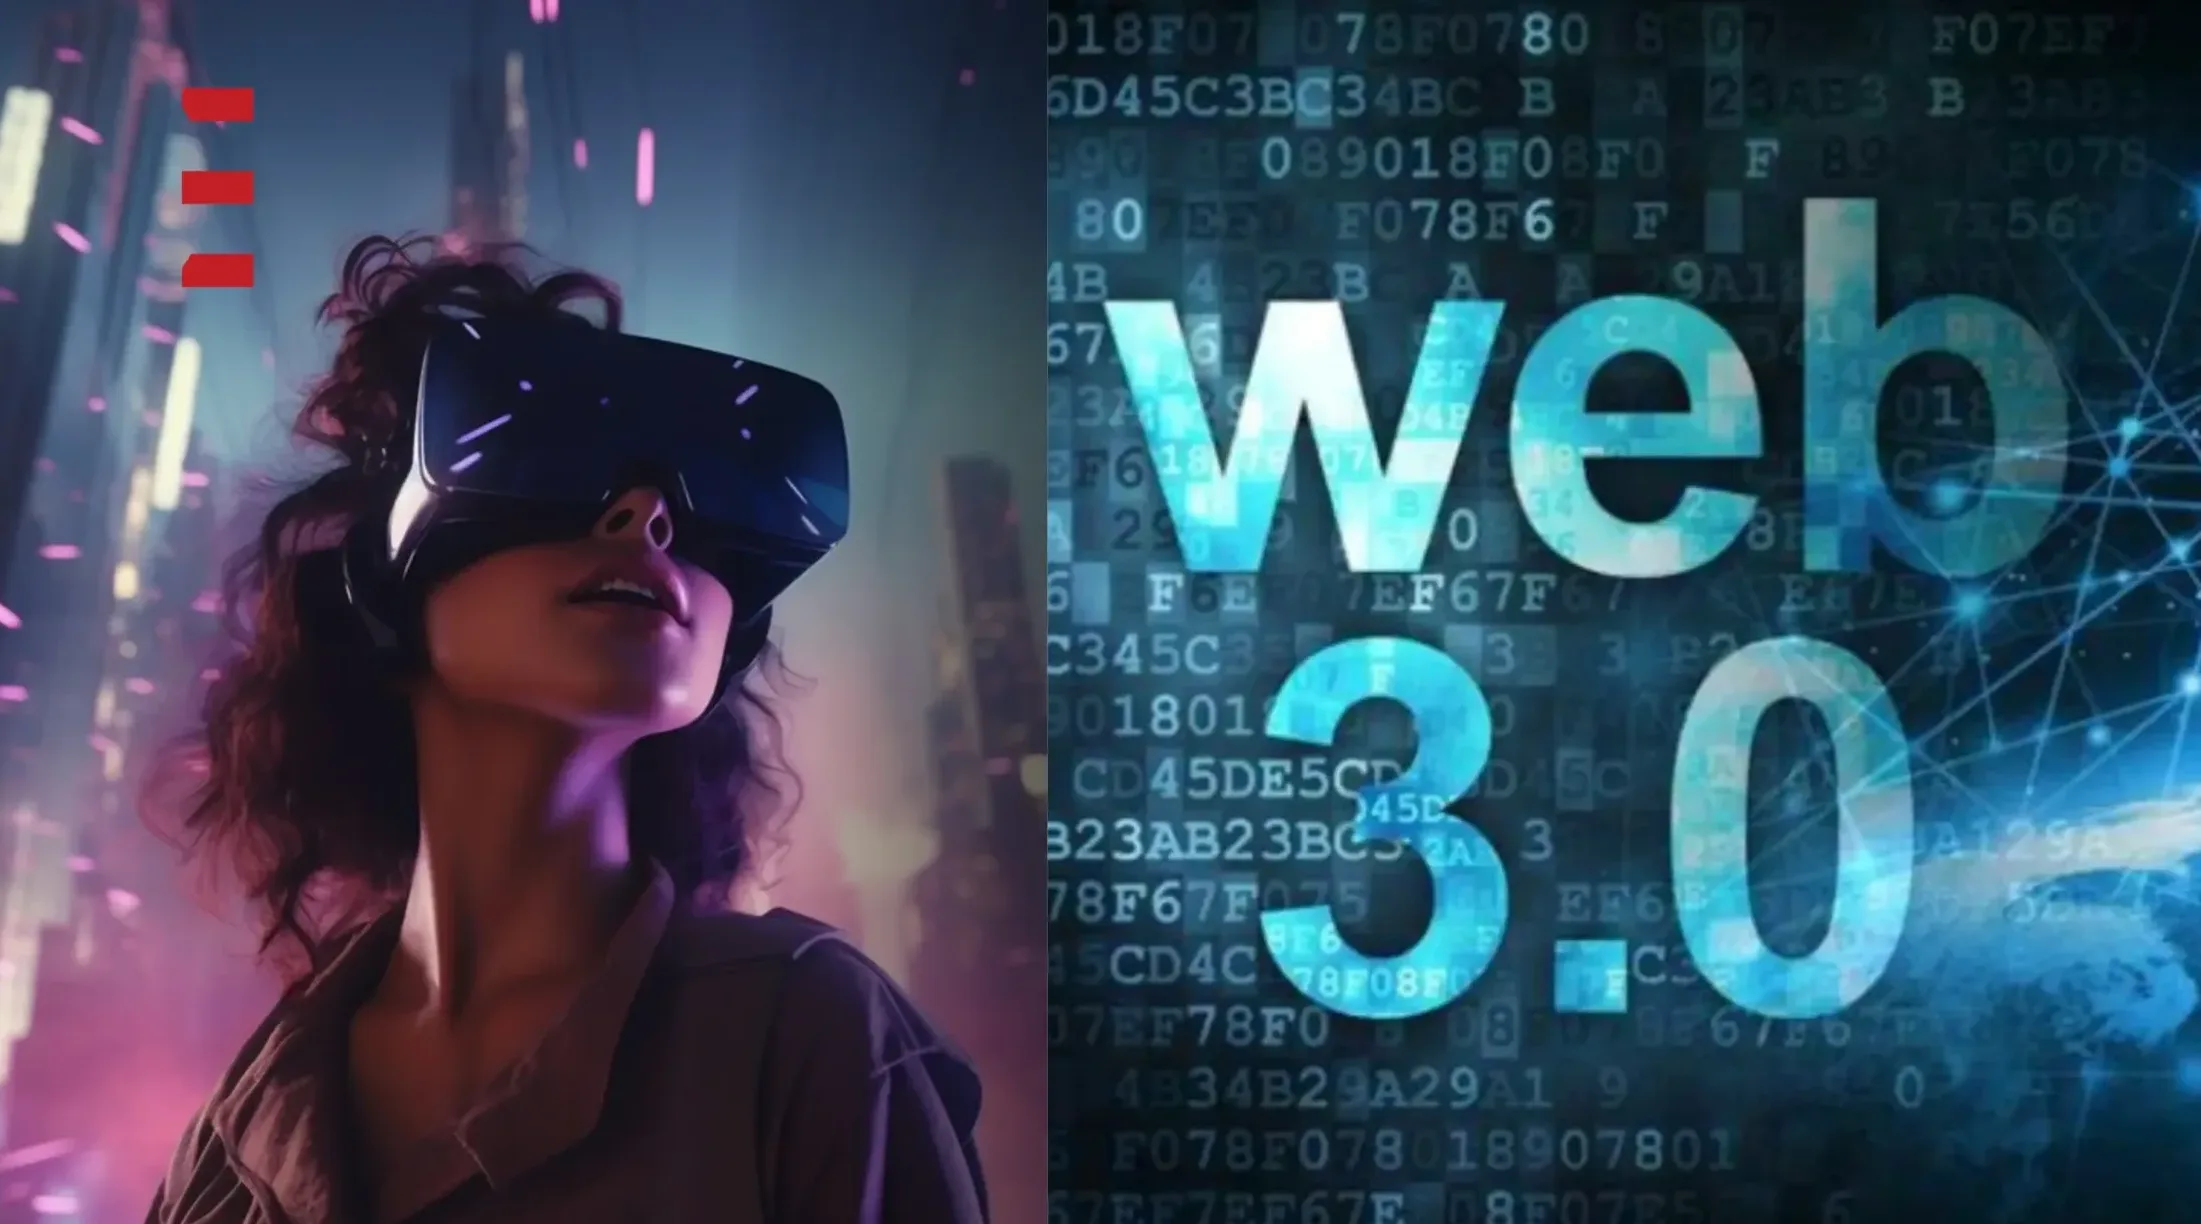 Metaverse Vs Web 3.0 – What are Differences & Similarities?